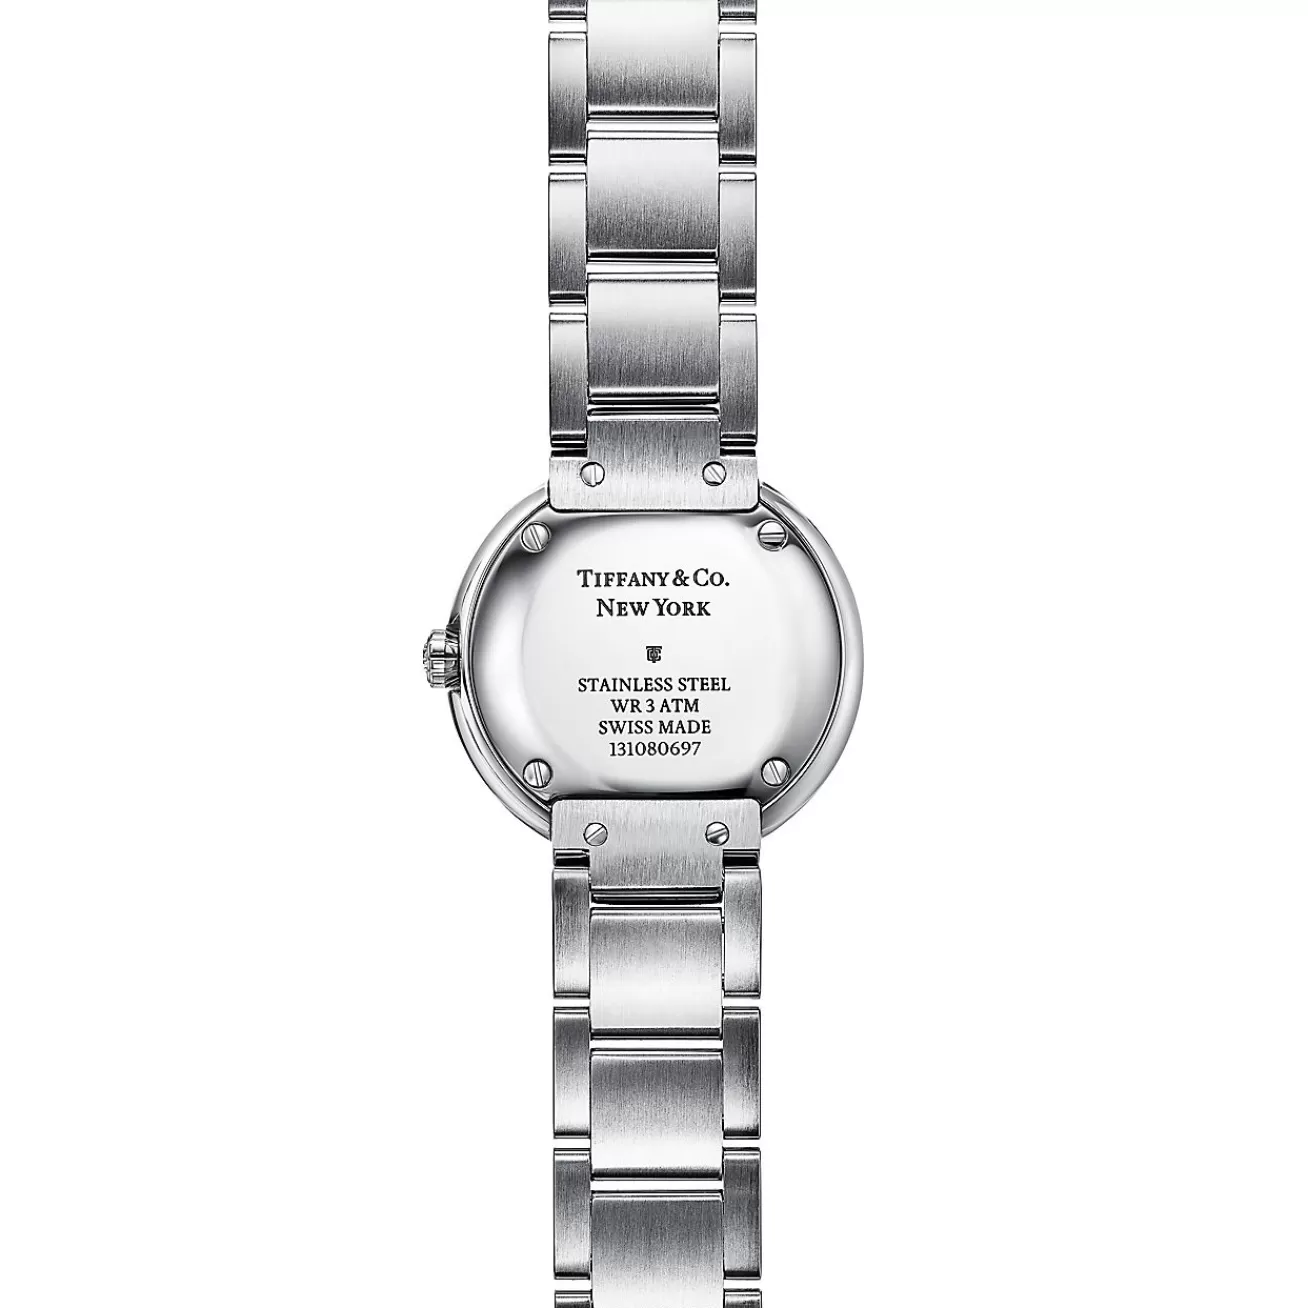 Tiffany & Co. Atlas® 24 mm watch in stainless steel with diamonds and a navy soleil dial. | ^Women Fine Watches | Women’s Watches